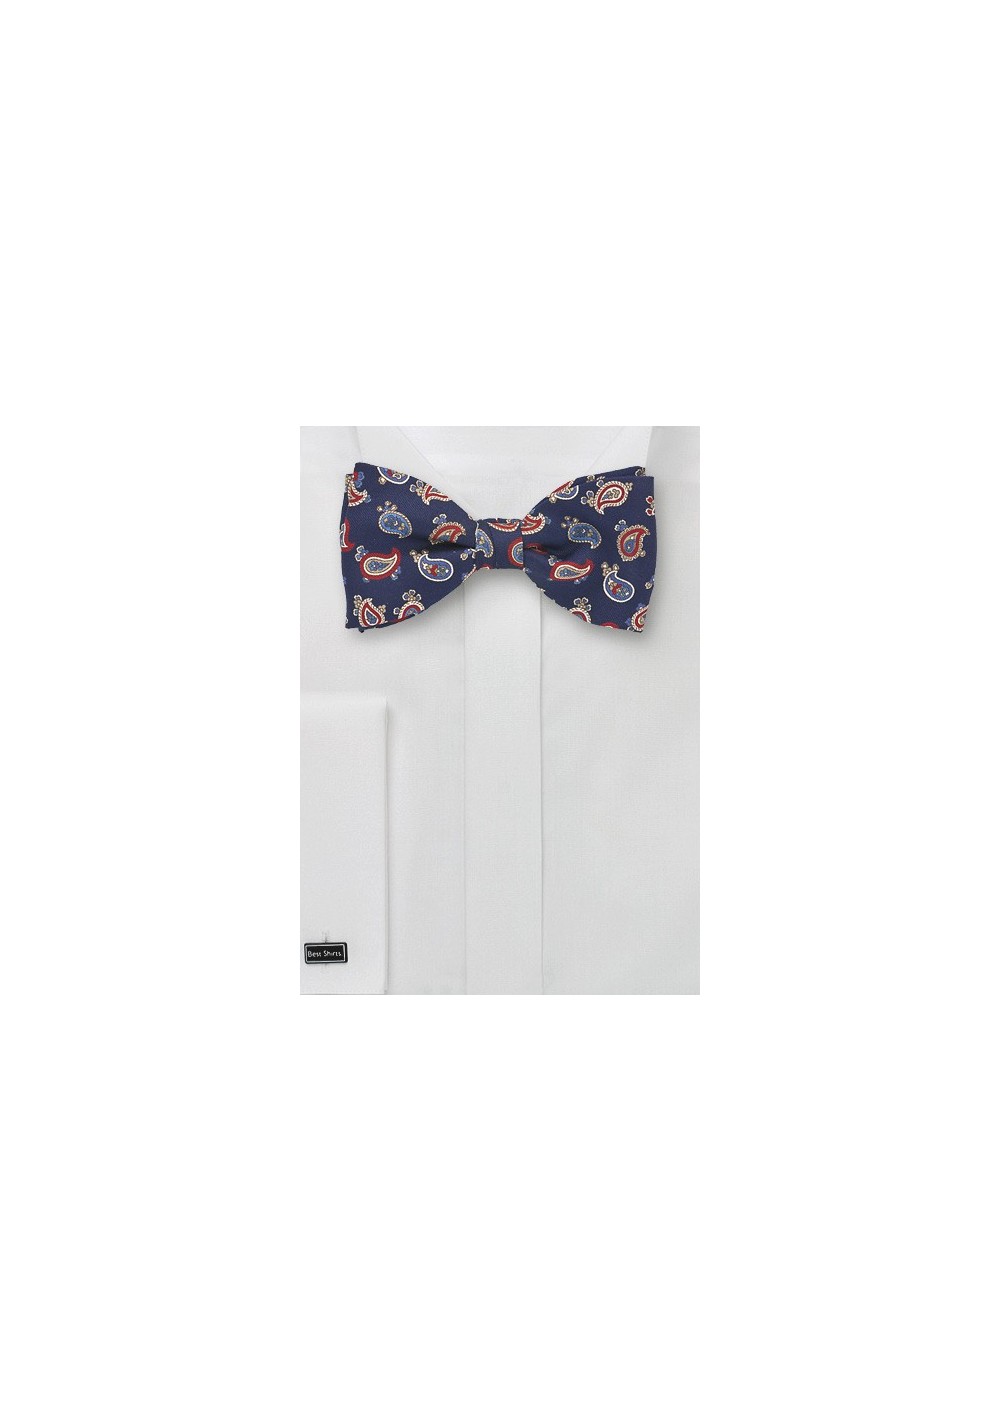 Paisley Bow Tie in Navy